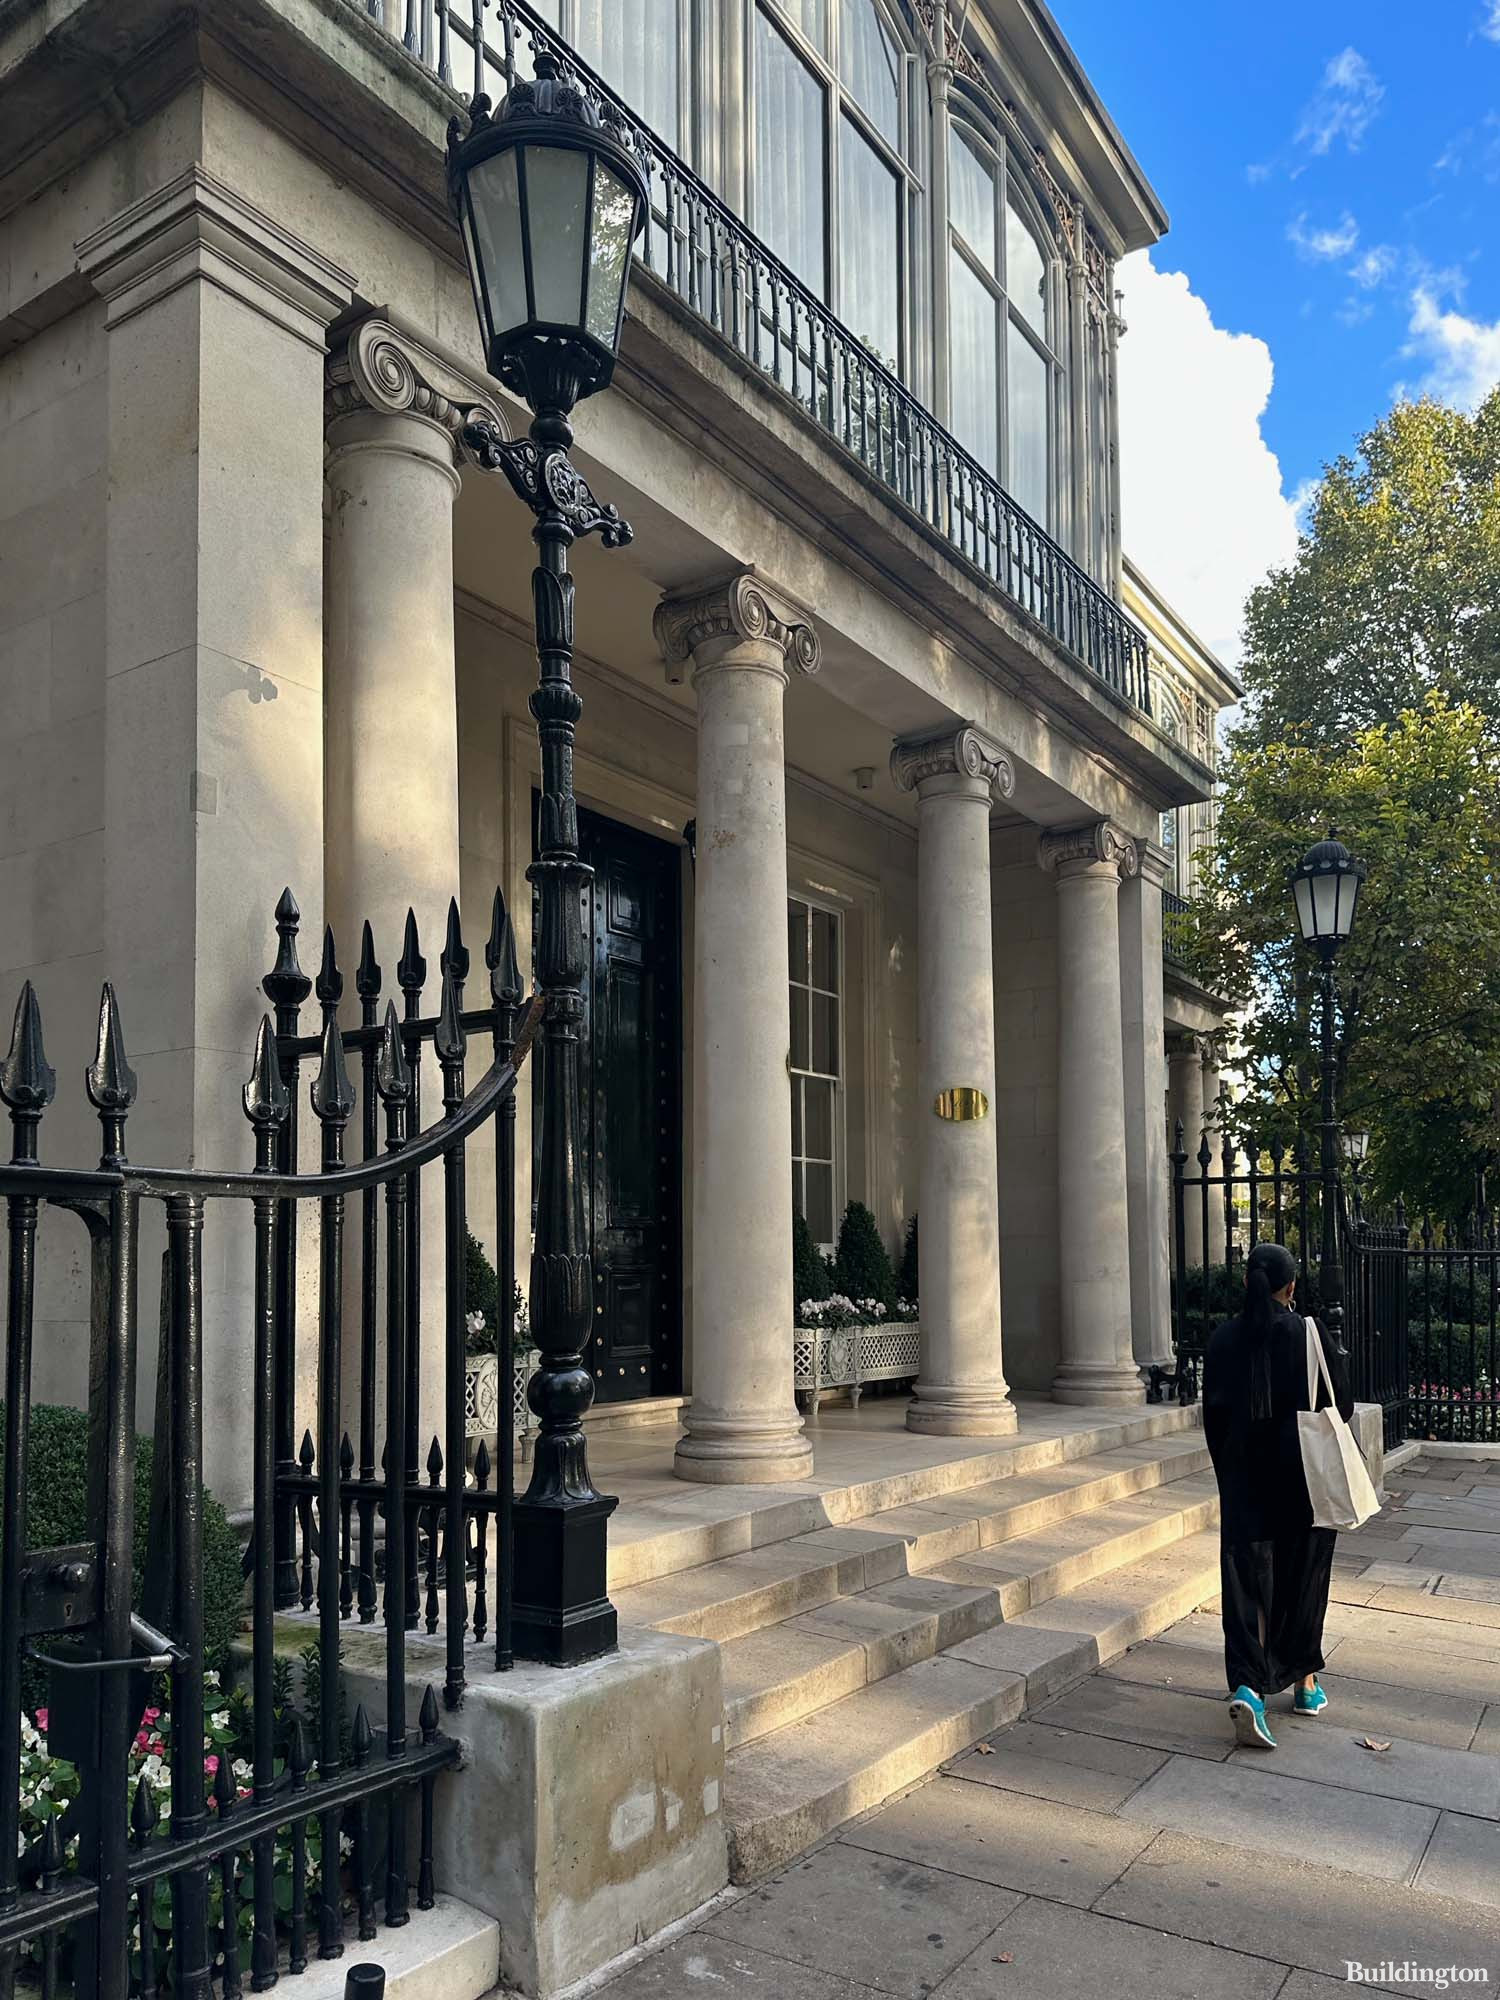 At the entrance to Dudley House Grade II* listed building in Mayfair, London W1.